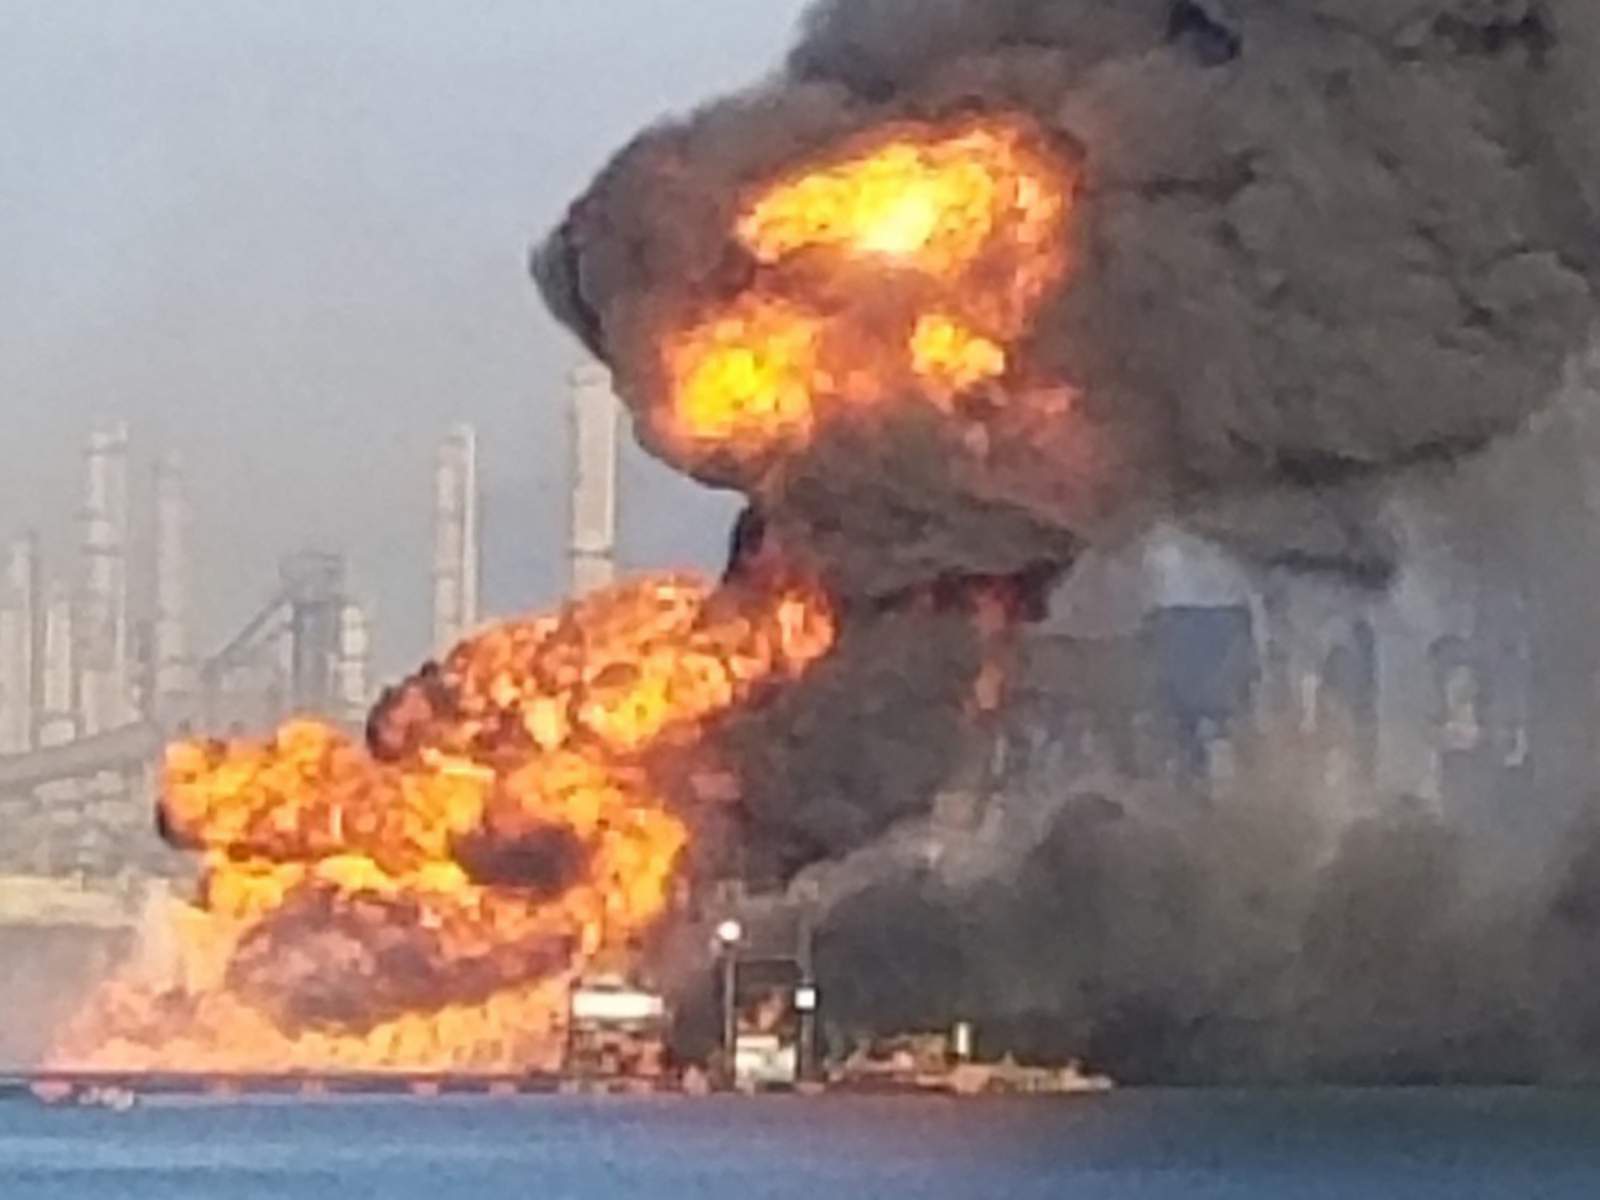 4 people missing after pipeline explosion at port in Texas